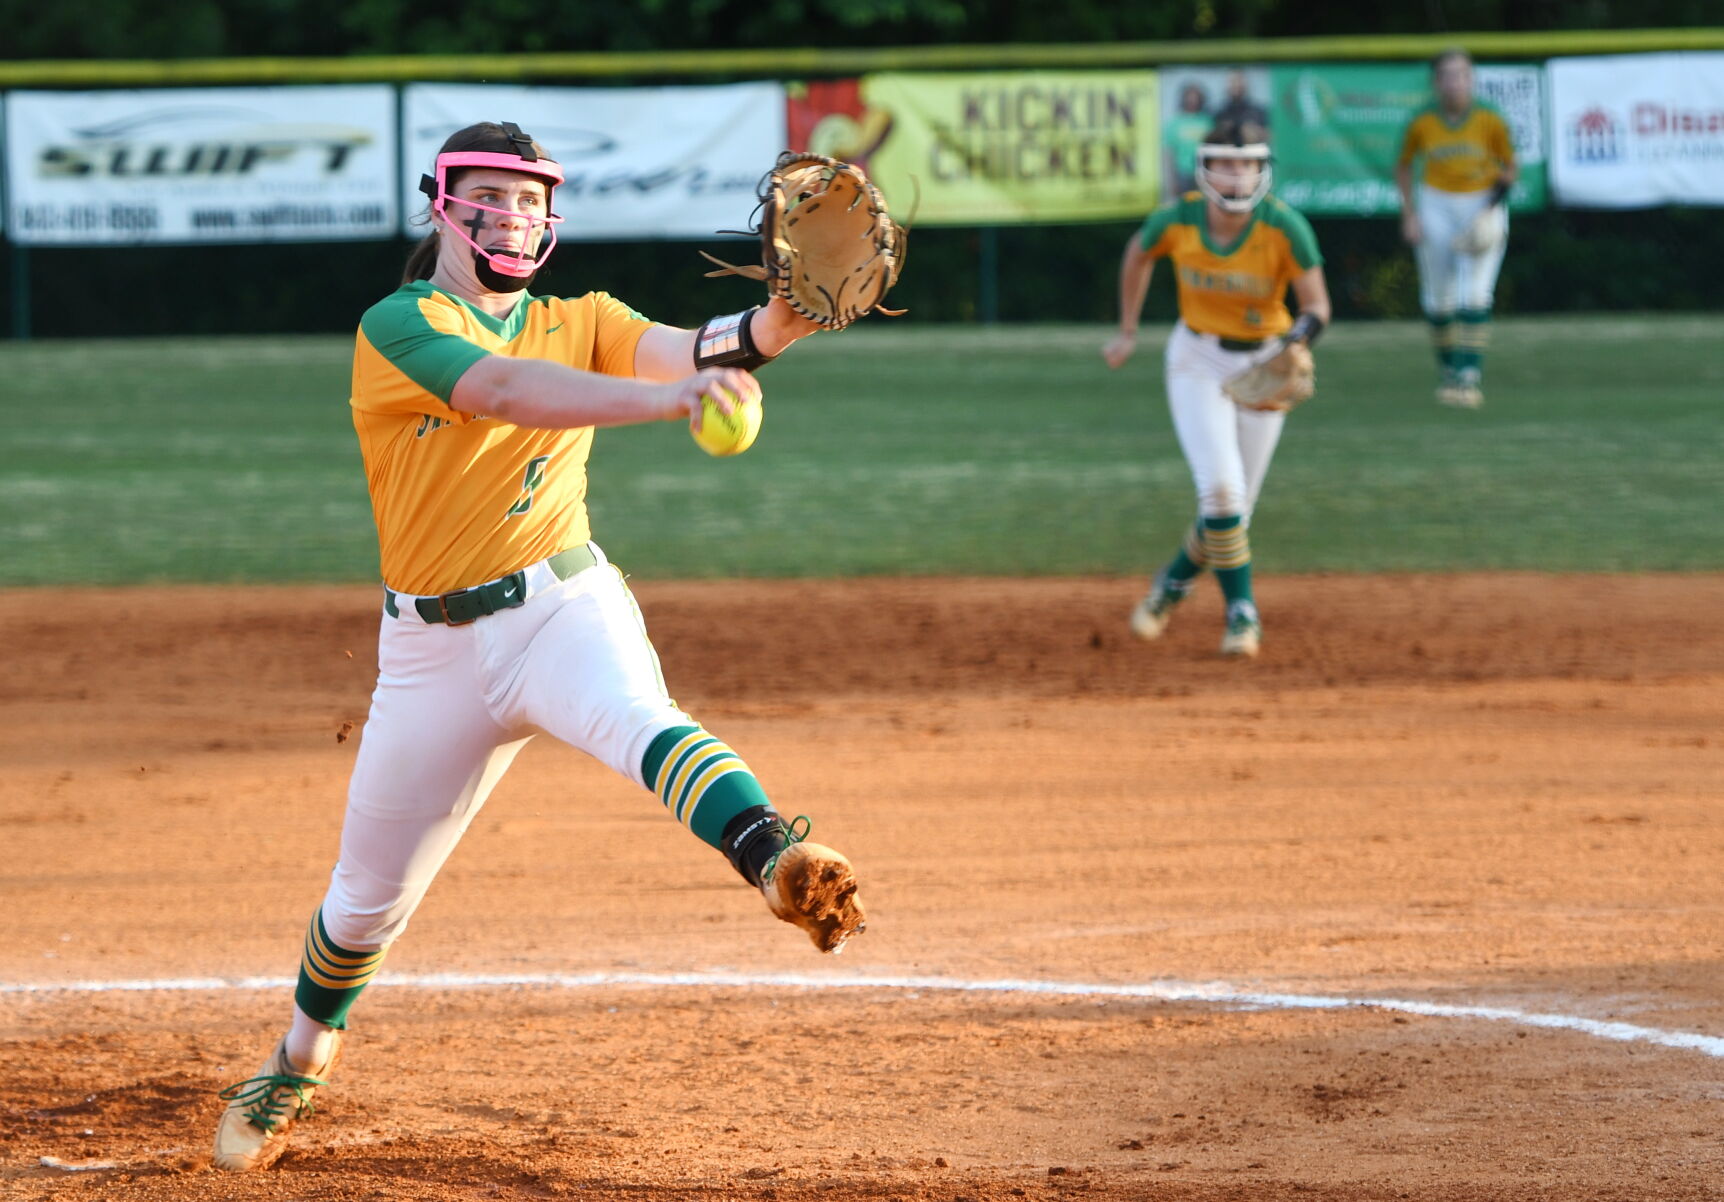 TEAM OF THE YEAR: Green Wave has been dominant on the softball diamond